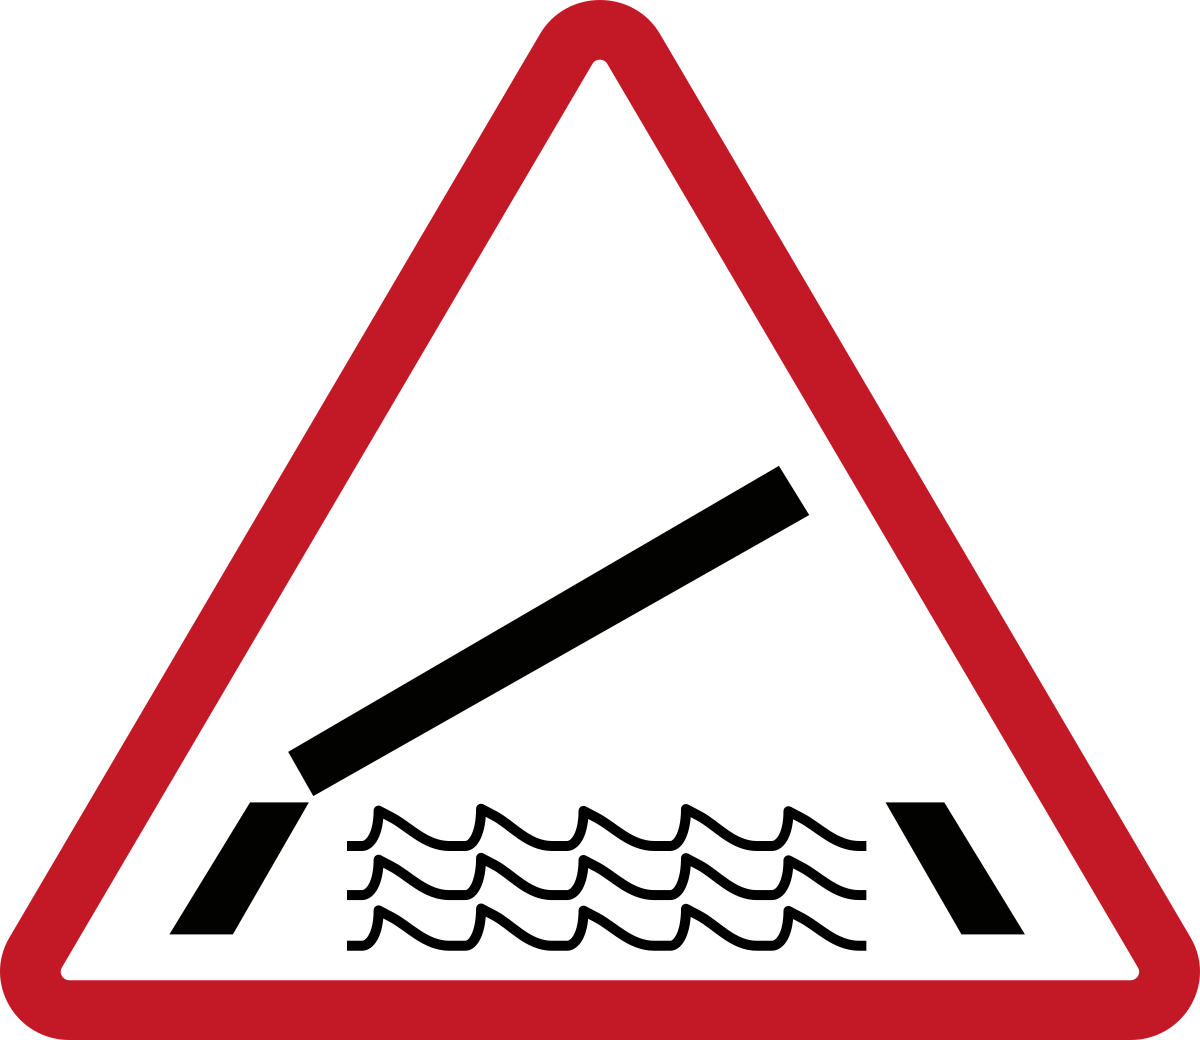 File:Philippines road sign W8-1.svg - Wikipedia